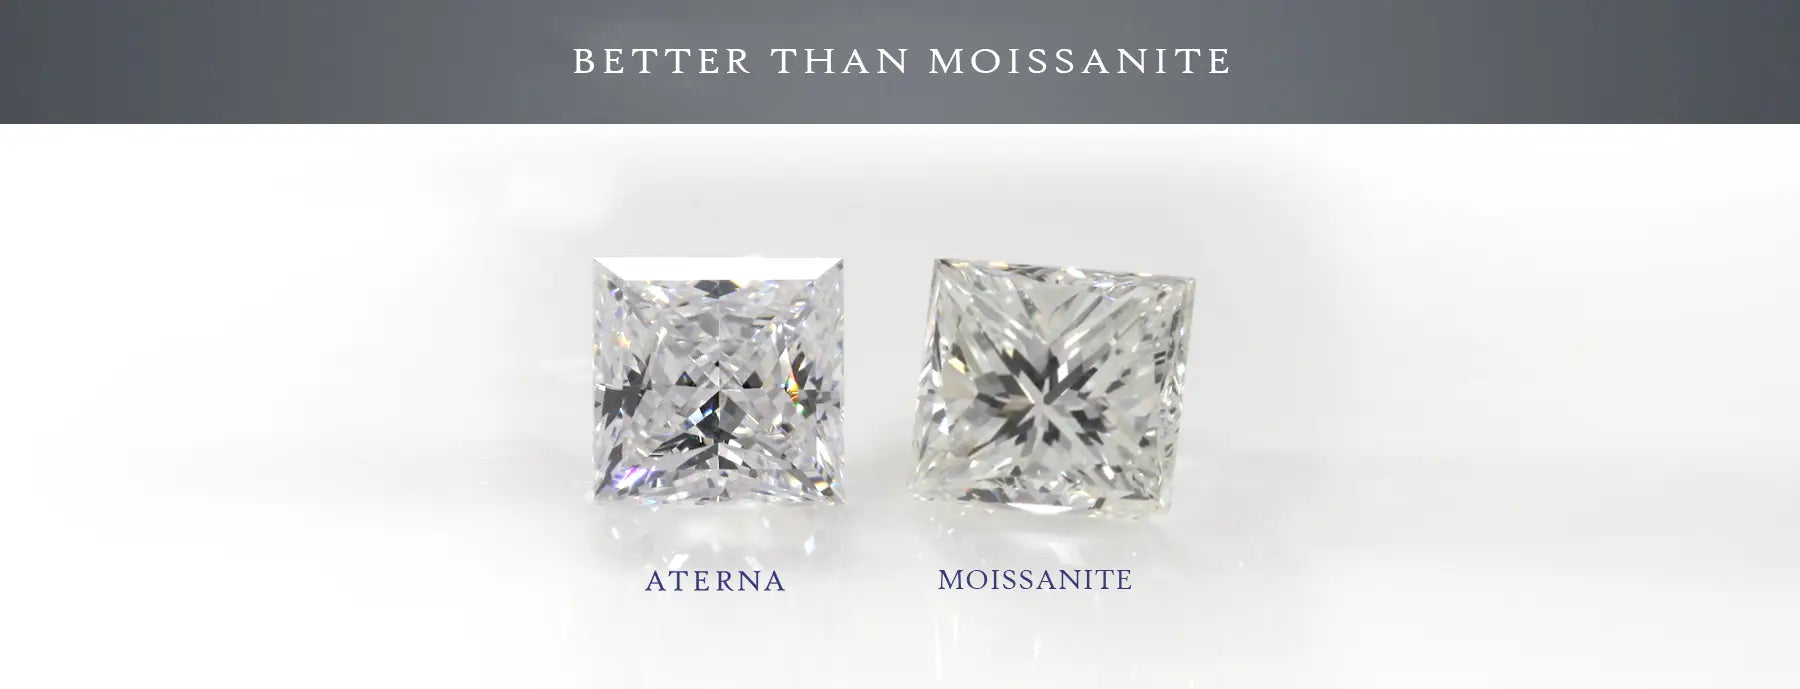 Aterna is better than moissanite lab diamonds from colvard and amora gem